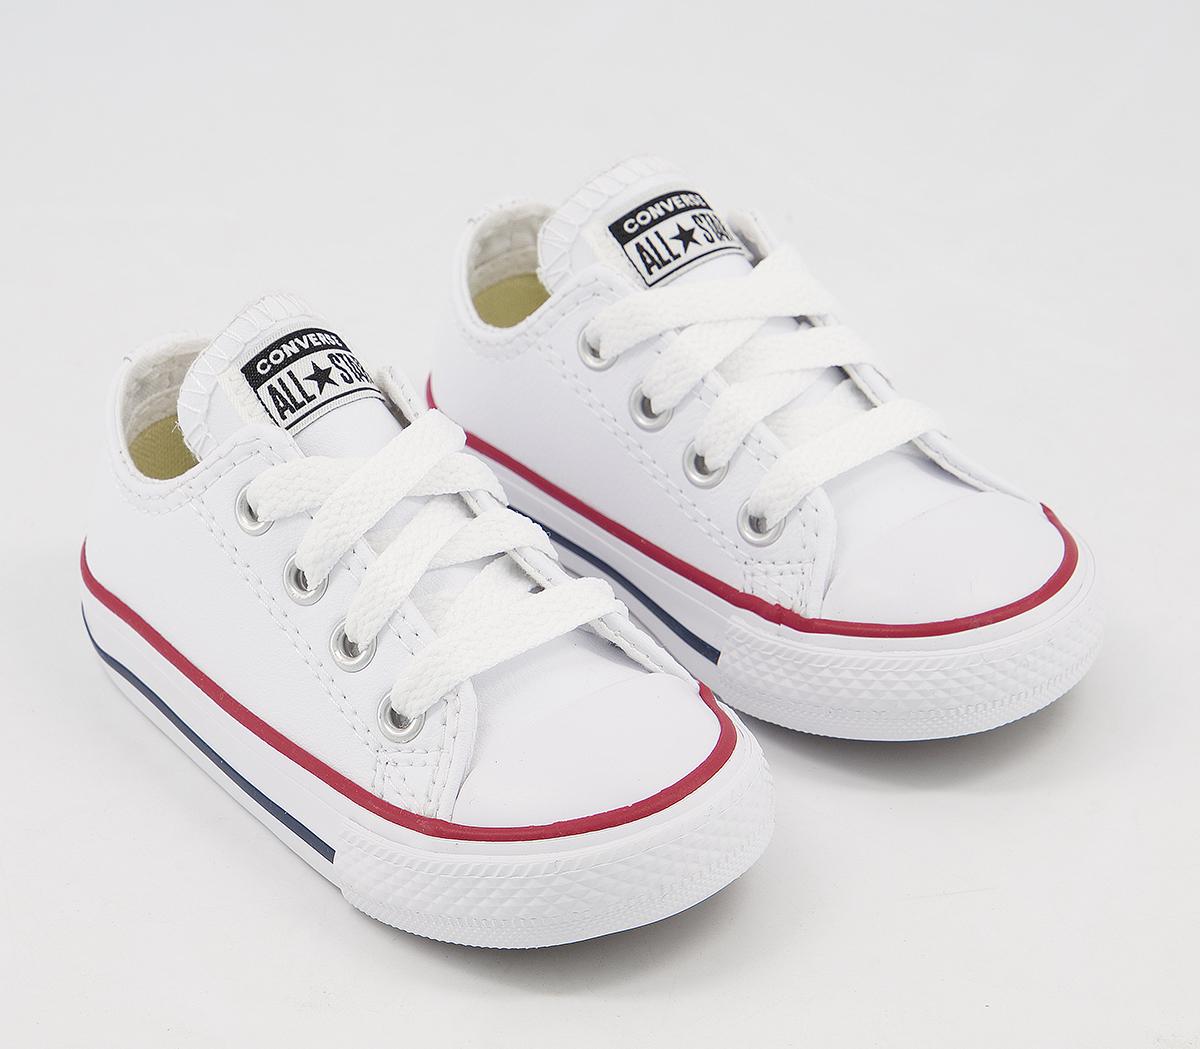 Converse All Star Low Infant Trainers Optical White Leather - Unisex